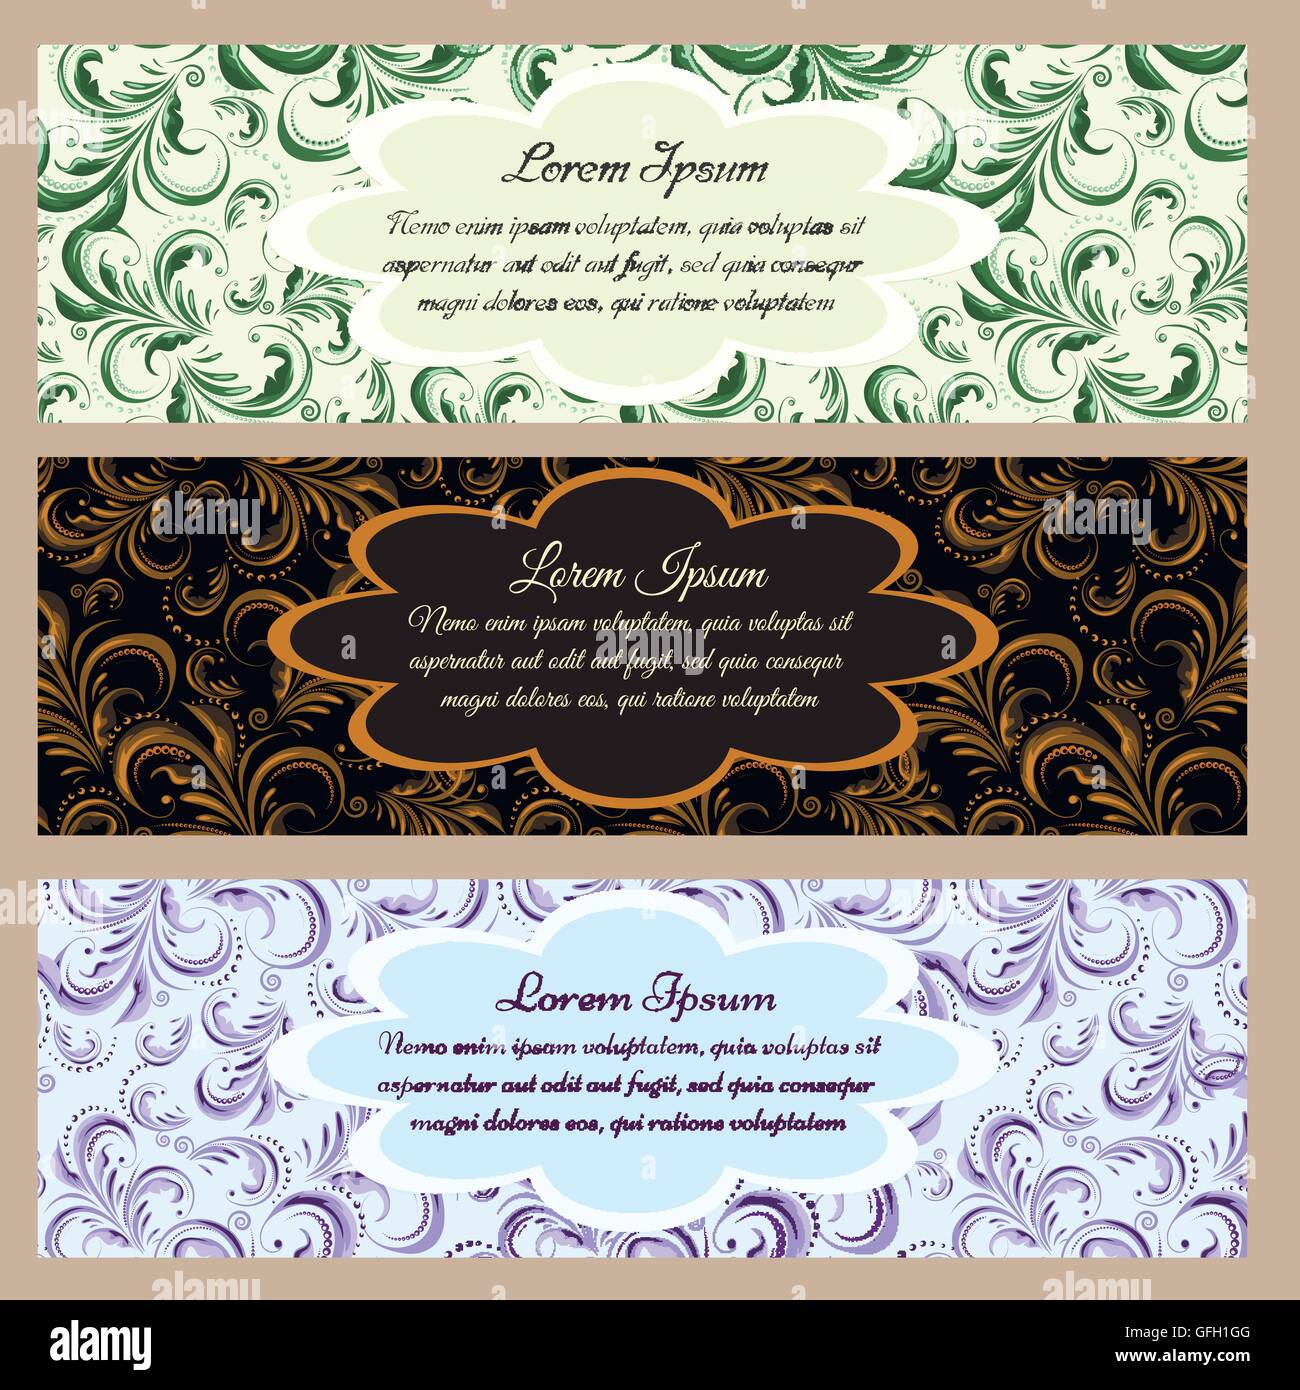 Vintage floral banners with text samples on seamless backgrounds. All seamless patterns saved as swatches in vector file. Stock Vector